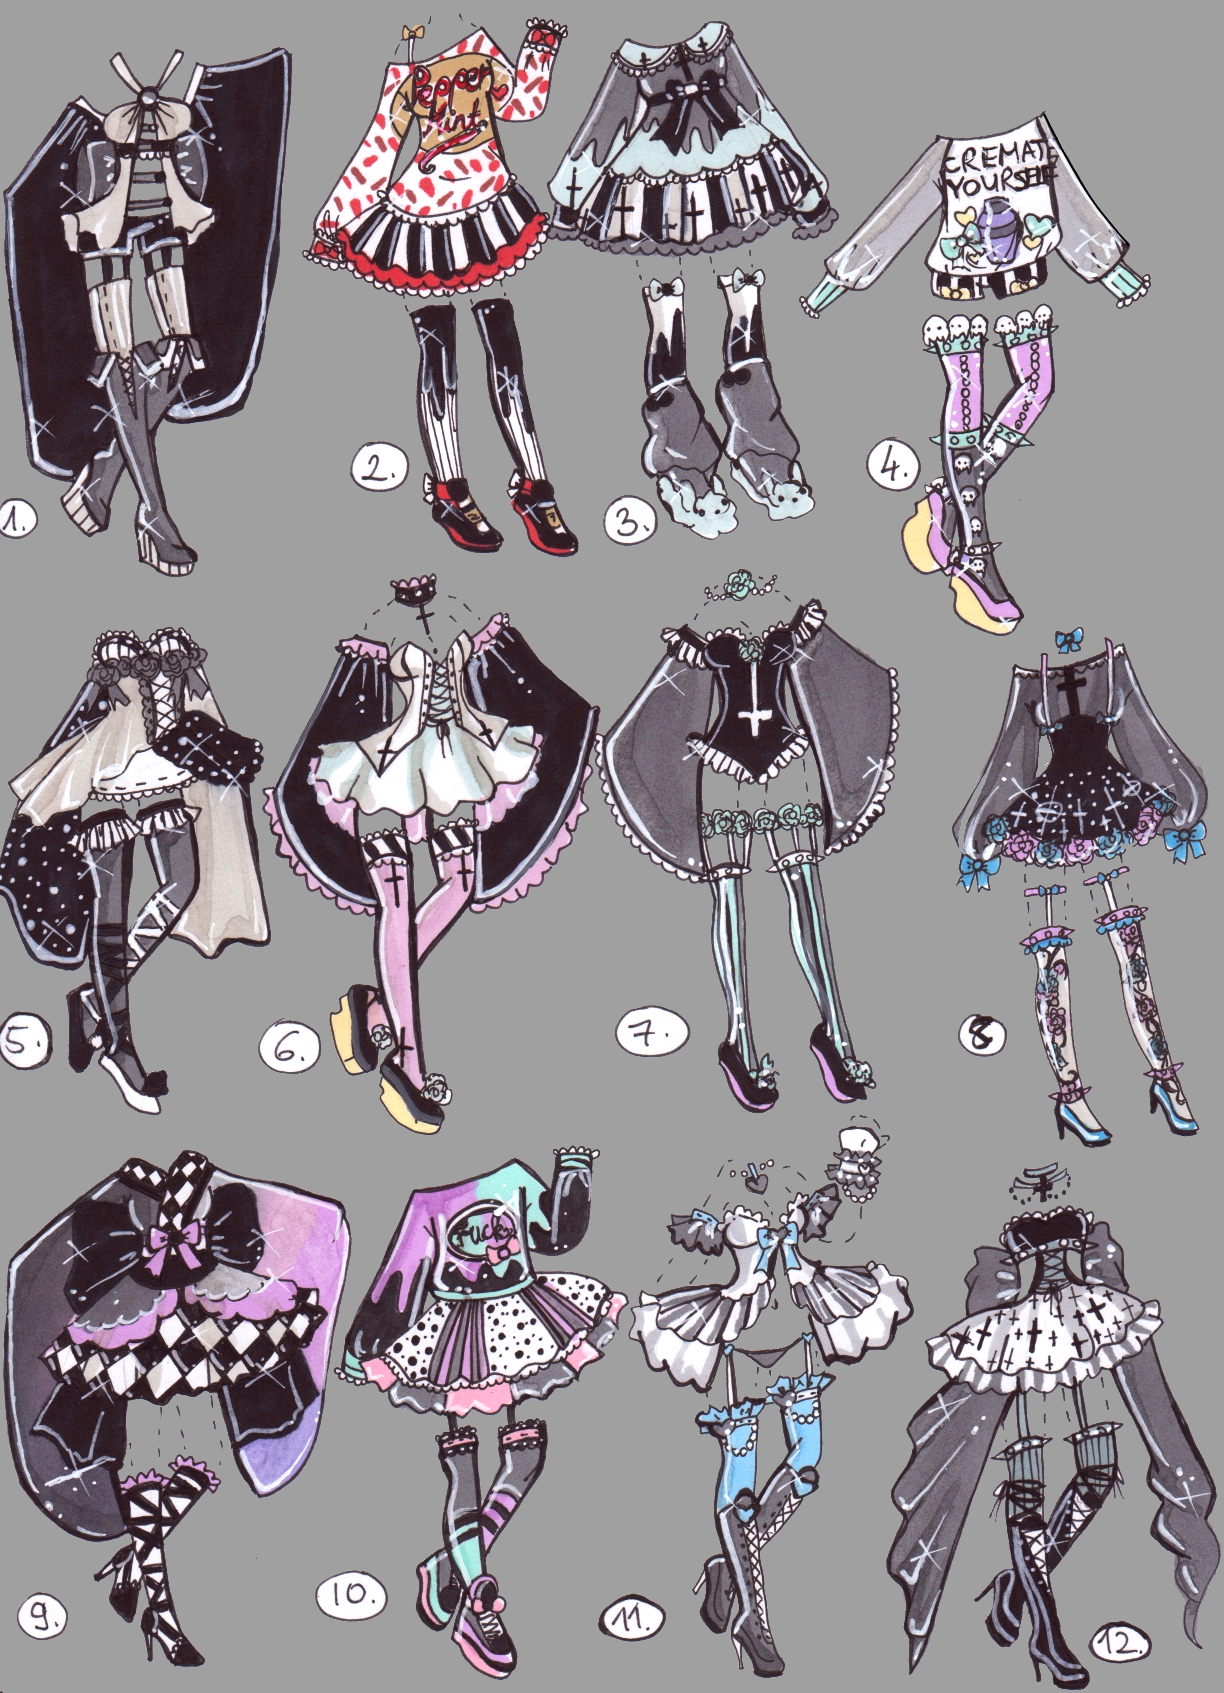 CLOSED-GothPastel Outfits by Guppie-Vibes on DeviantArt